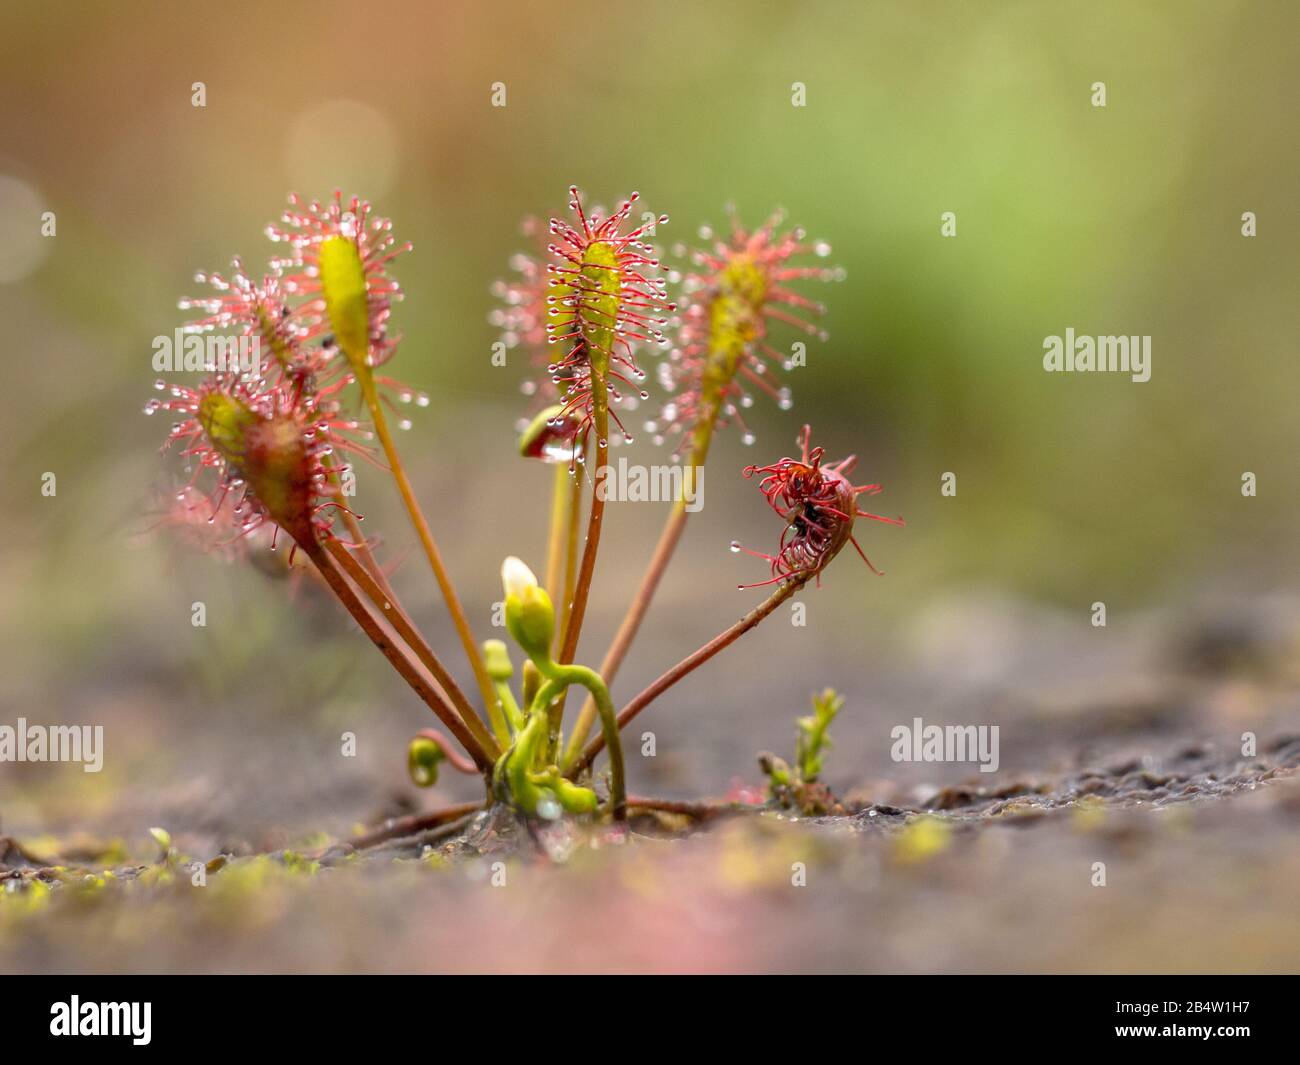 Spoonleaf sundew (Drosera intermedia) is an insectivorous plant species belonging to the sundew genus. With insects caught in leaves. Stock Photo